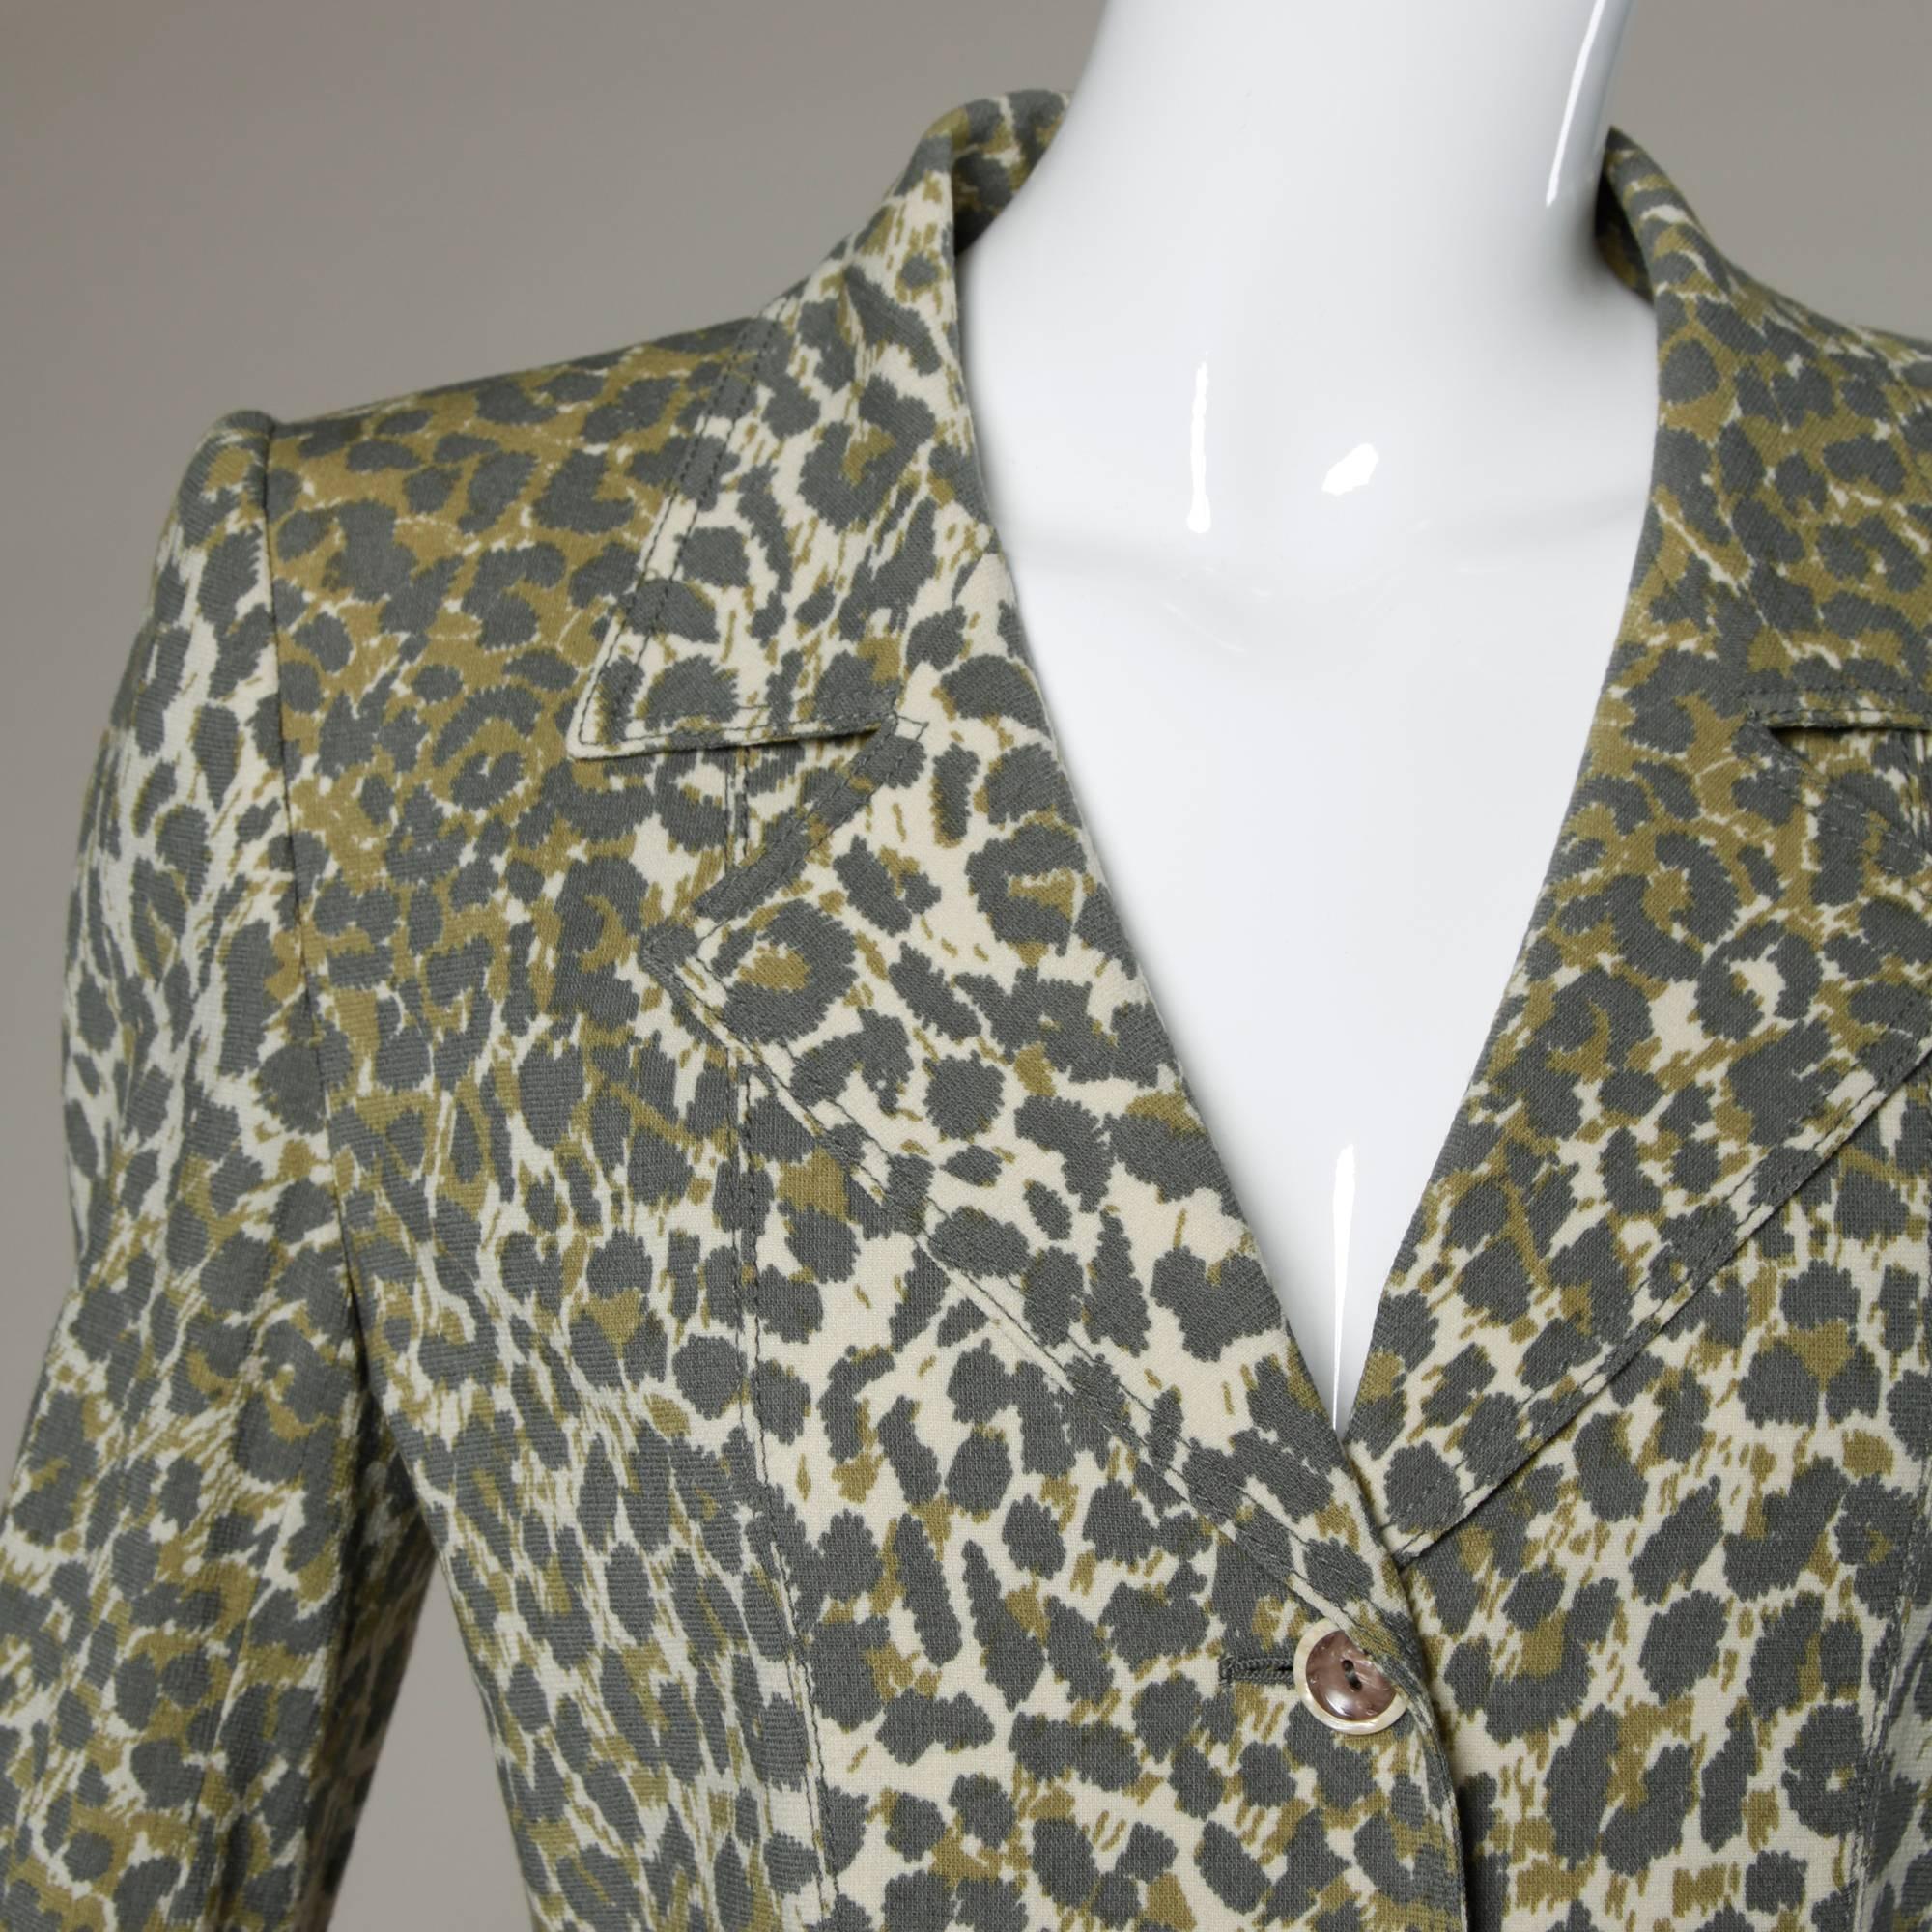 Leopard print blazer jacket by Emanuel Ungaro. Notched lapels and unique mother-of-pearl buttons.

Details:

Fully Lined
Front Pockets
Shoulder Pads Sewn Into Lining
Front Button Closure 
Marked Size: US 8
Estimated Size: 6-8
Color: Dark